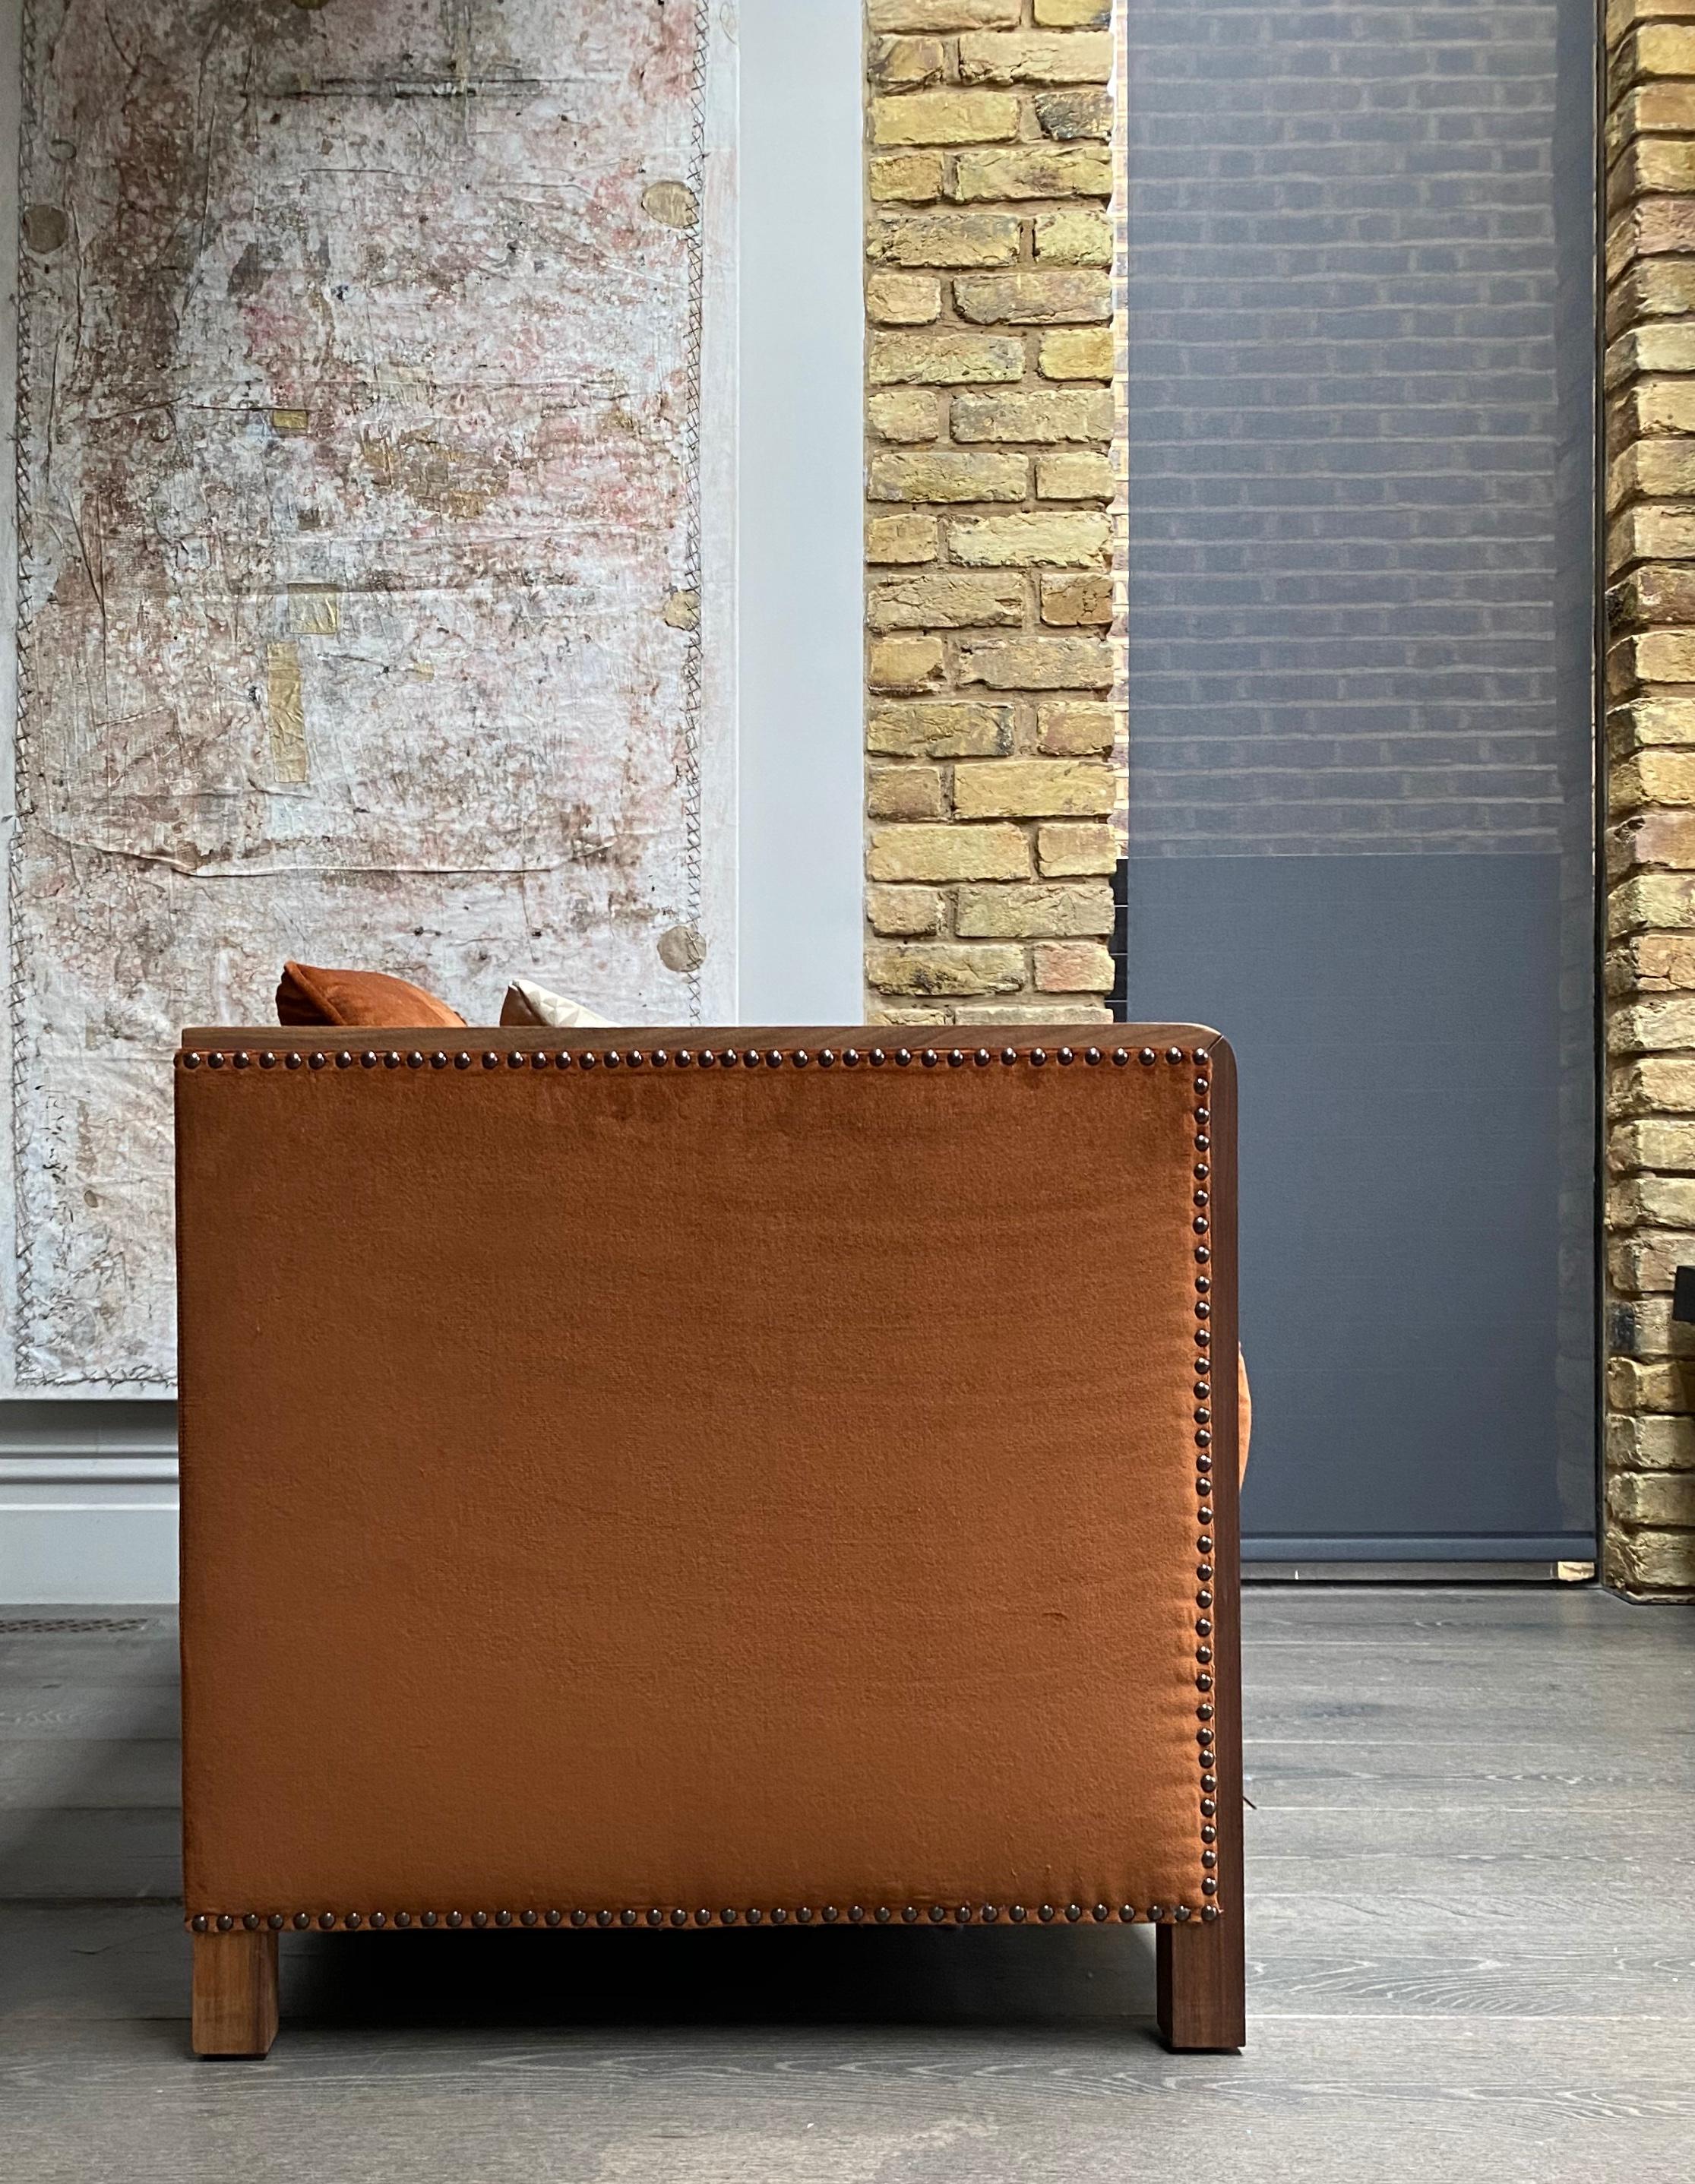 Utterly lounge worthy, the Bacco armchair design is a contemporary remodel of the iconic boxy chair.

Showing opulence with a Hollywood Regency feel, the glamorous Bacco armchair is upholstered with natural wood finishes, 6 meters of the most divine